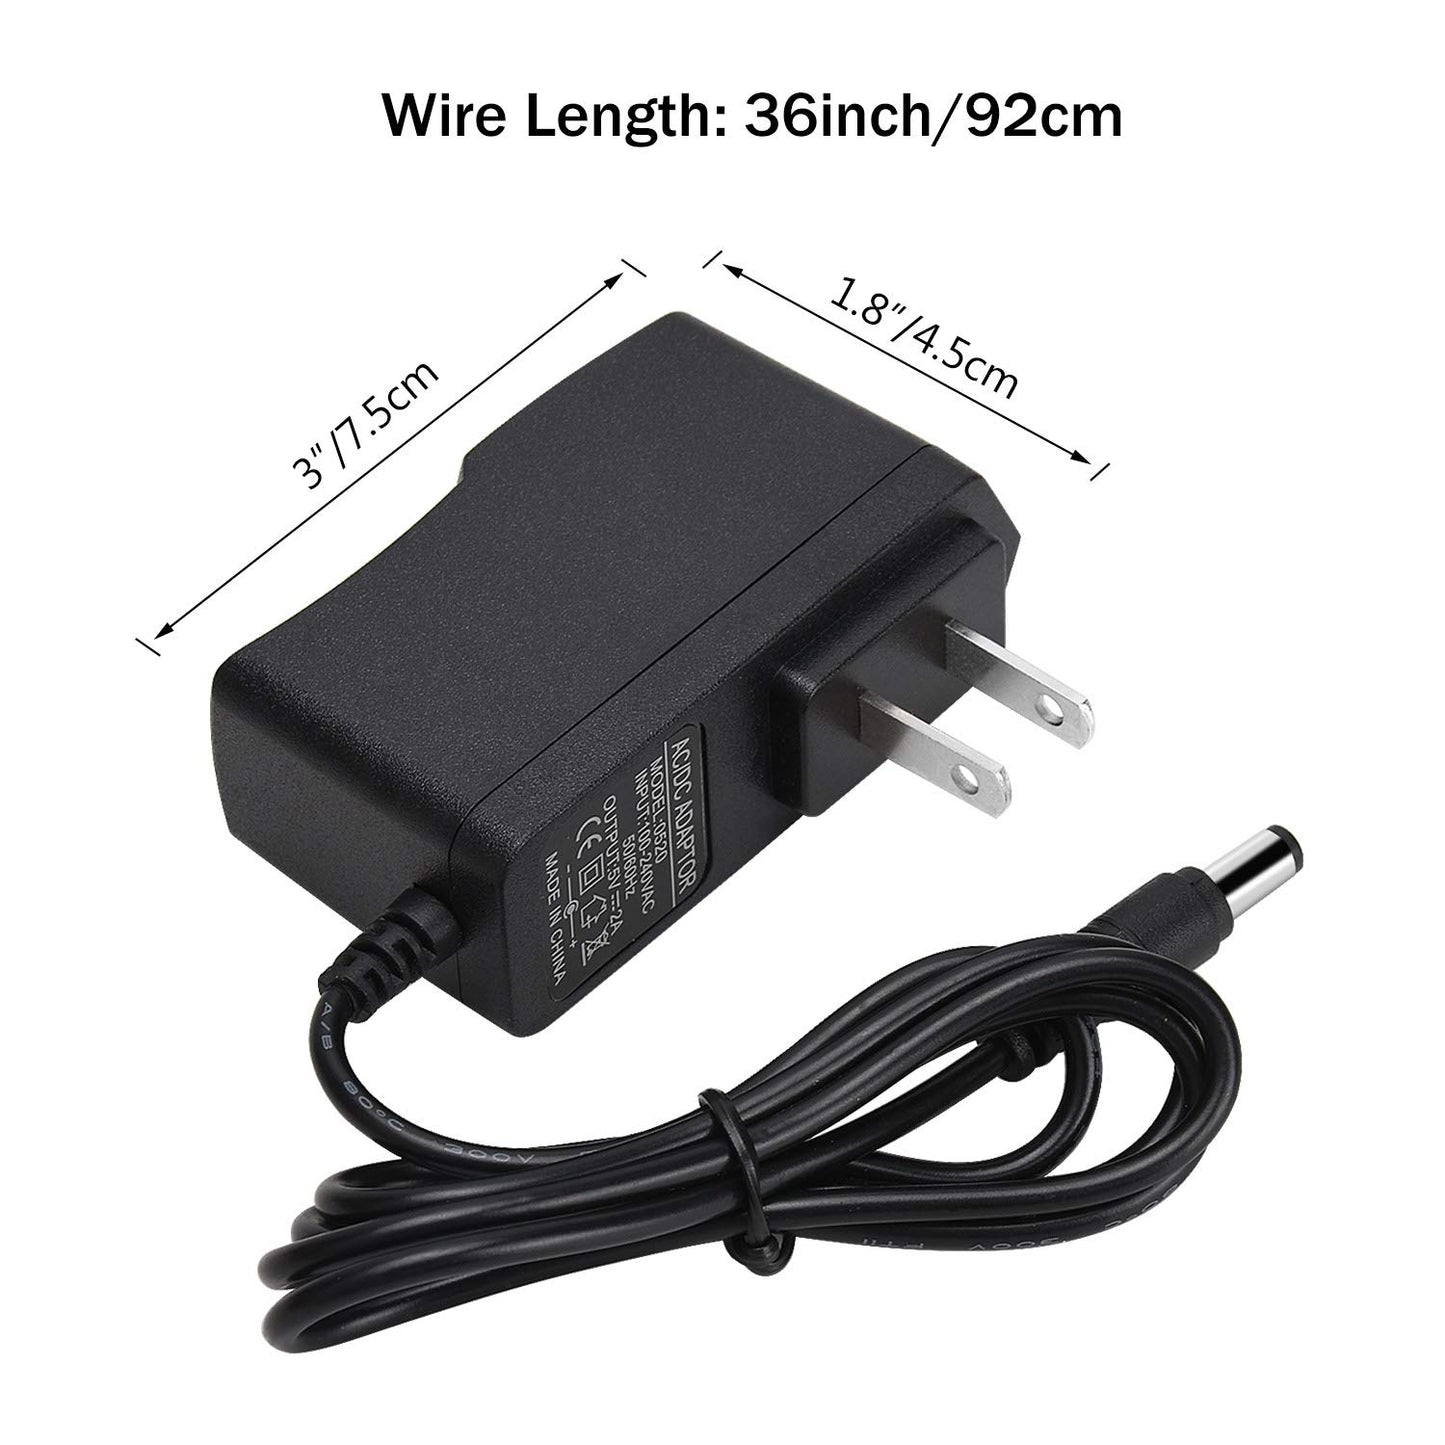 2 Pack DC 5V 2A Power Adapter, AC 100-240V to DC 5Volt Transformers, Power Supply for 2.1mm X 5.5mm US Plug